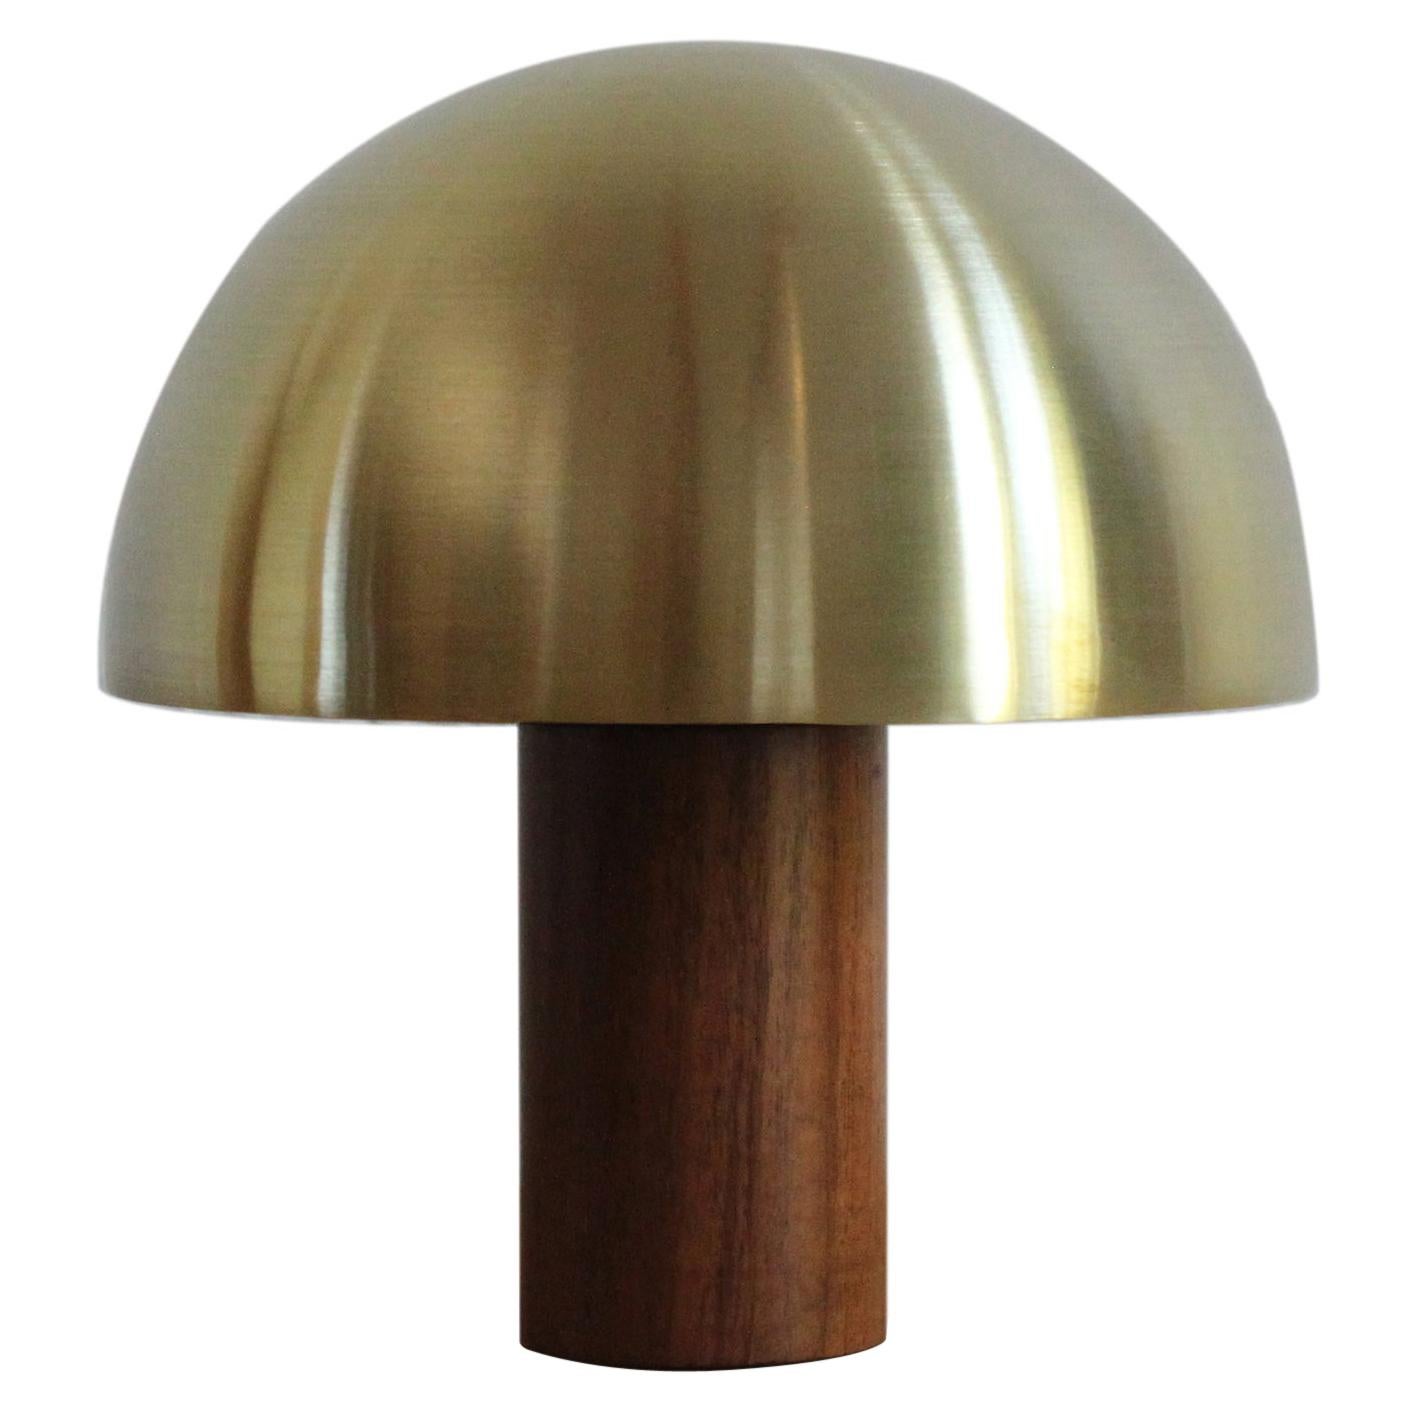 Acento Table Lamp by Maria Beckmann, Represented by Tuleste Factory